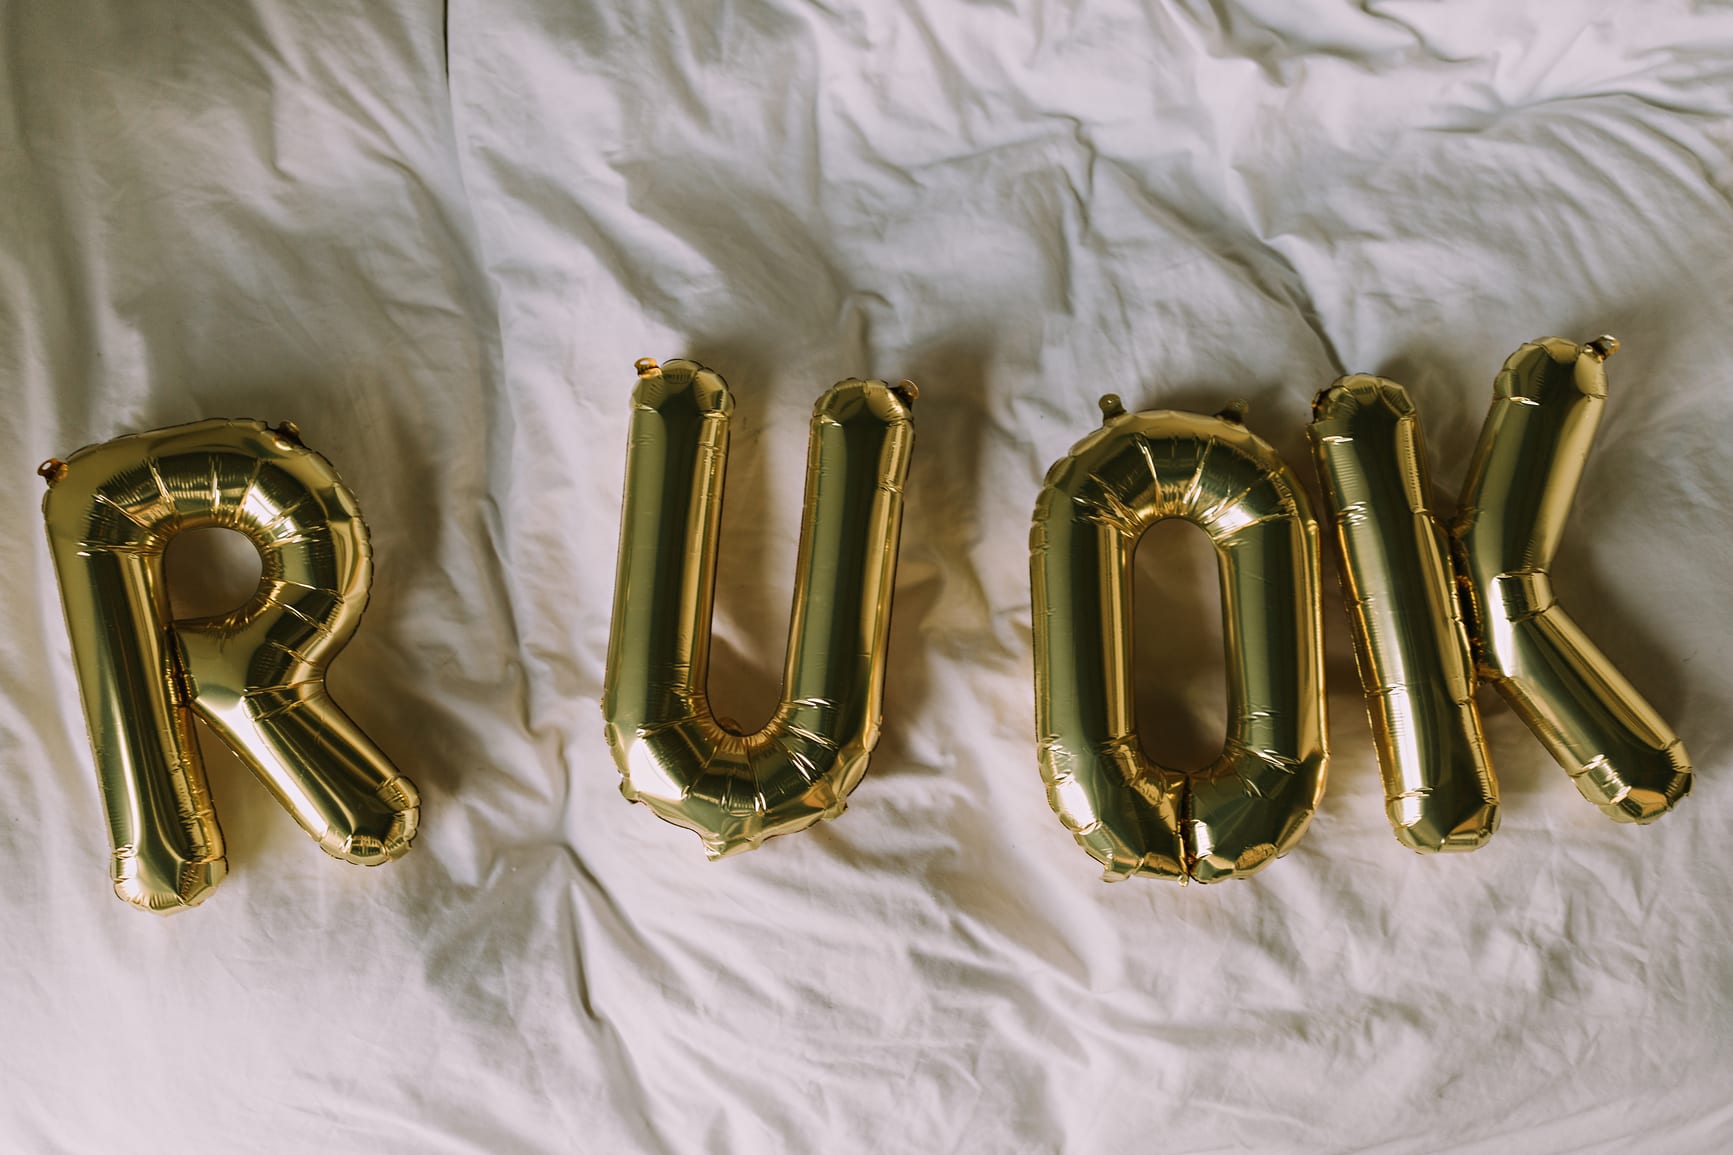 Gold Balloon Letters Ask the Question "Are You Okay?"